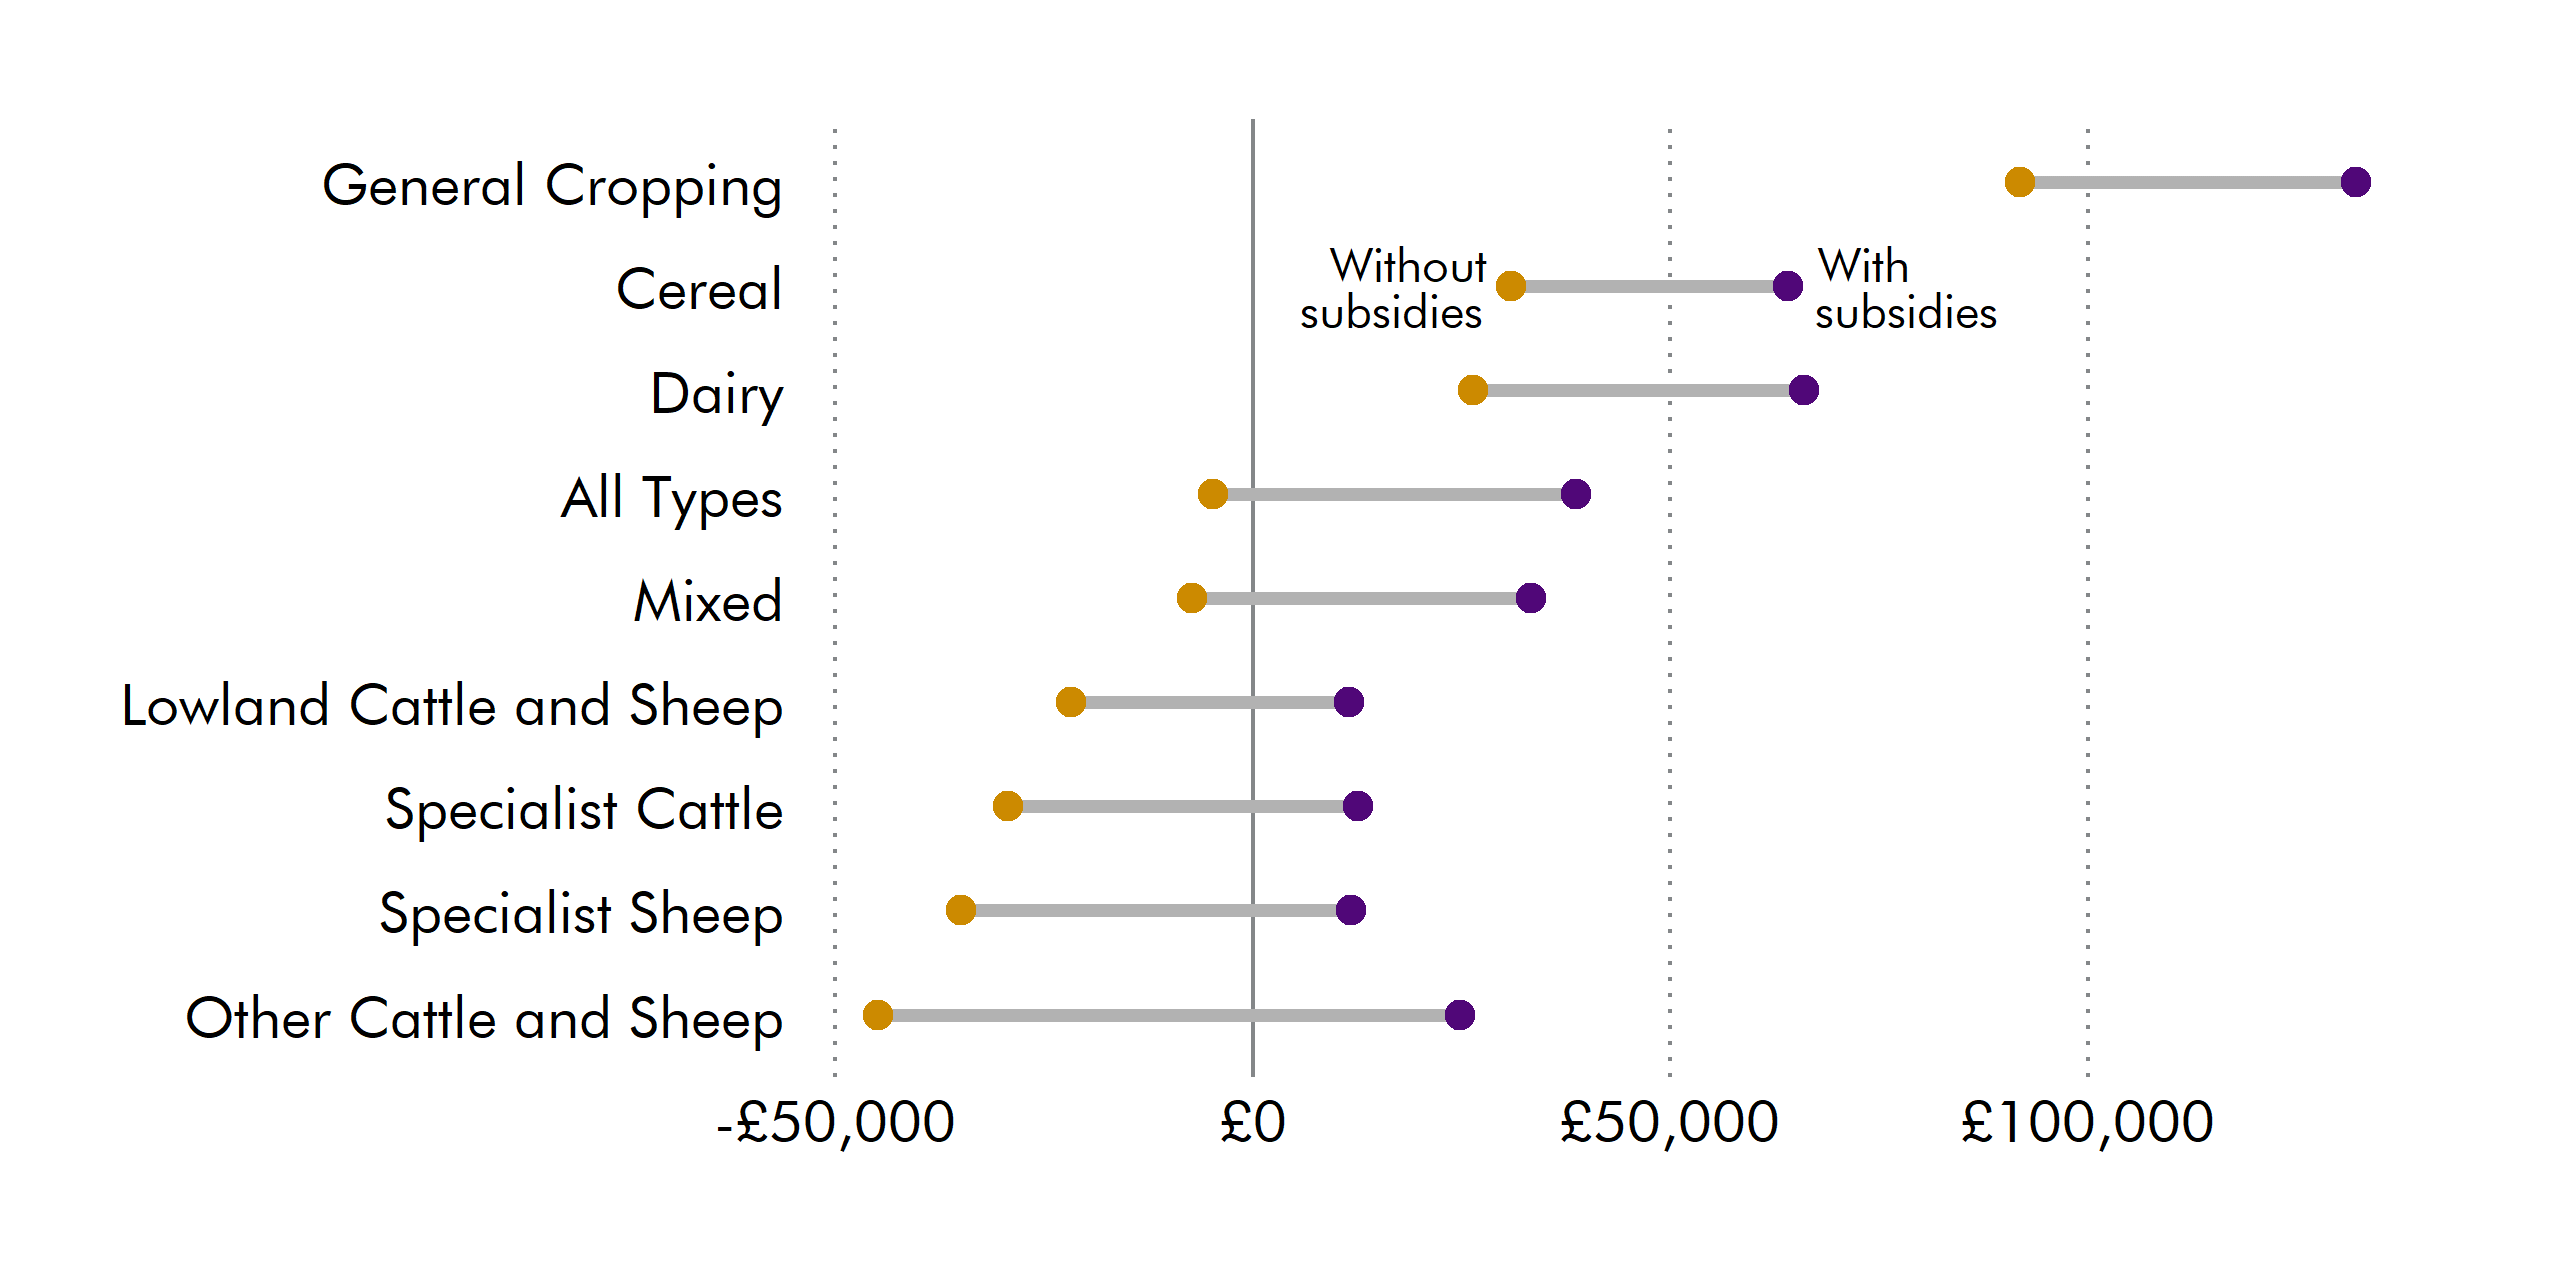 Farm business incomes vary widely between sectors. For the average Scottish holding, and for all sectors aside from dairy, cereals and general cropping, farms and crofts make a loss without agricultural subsidies.